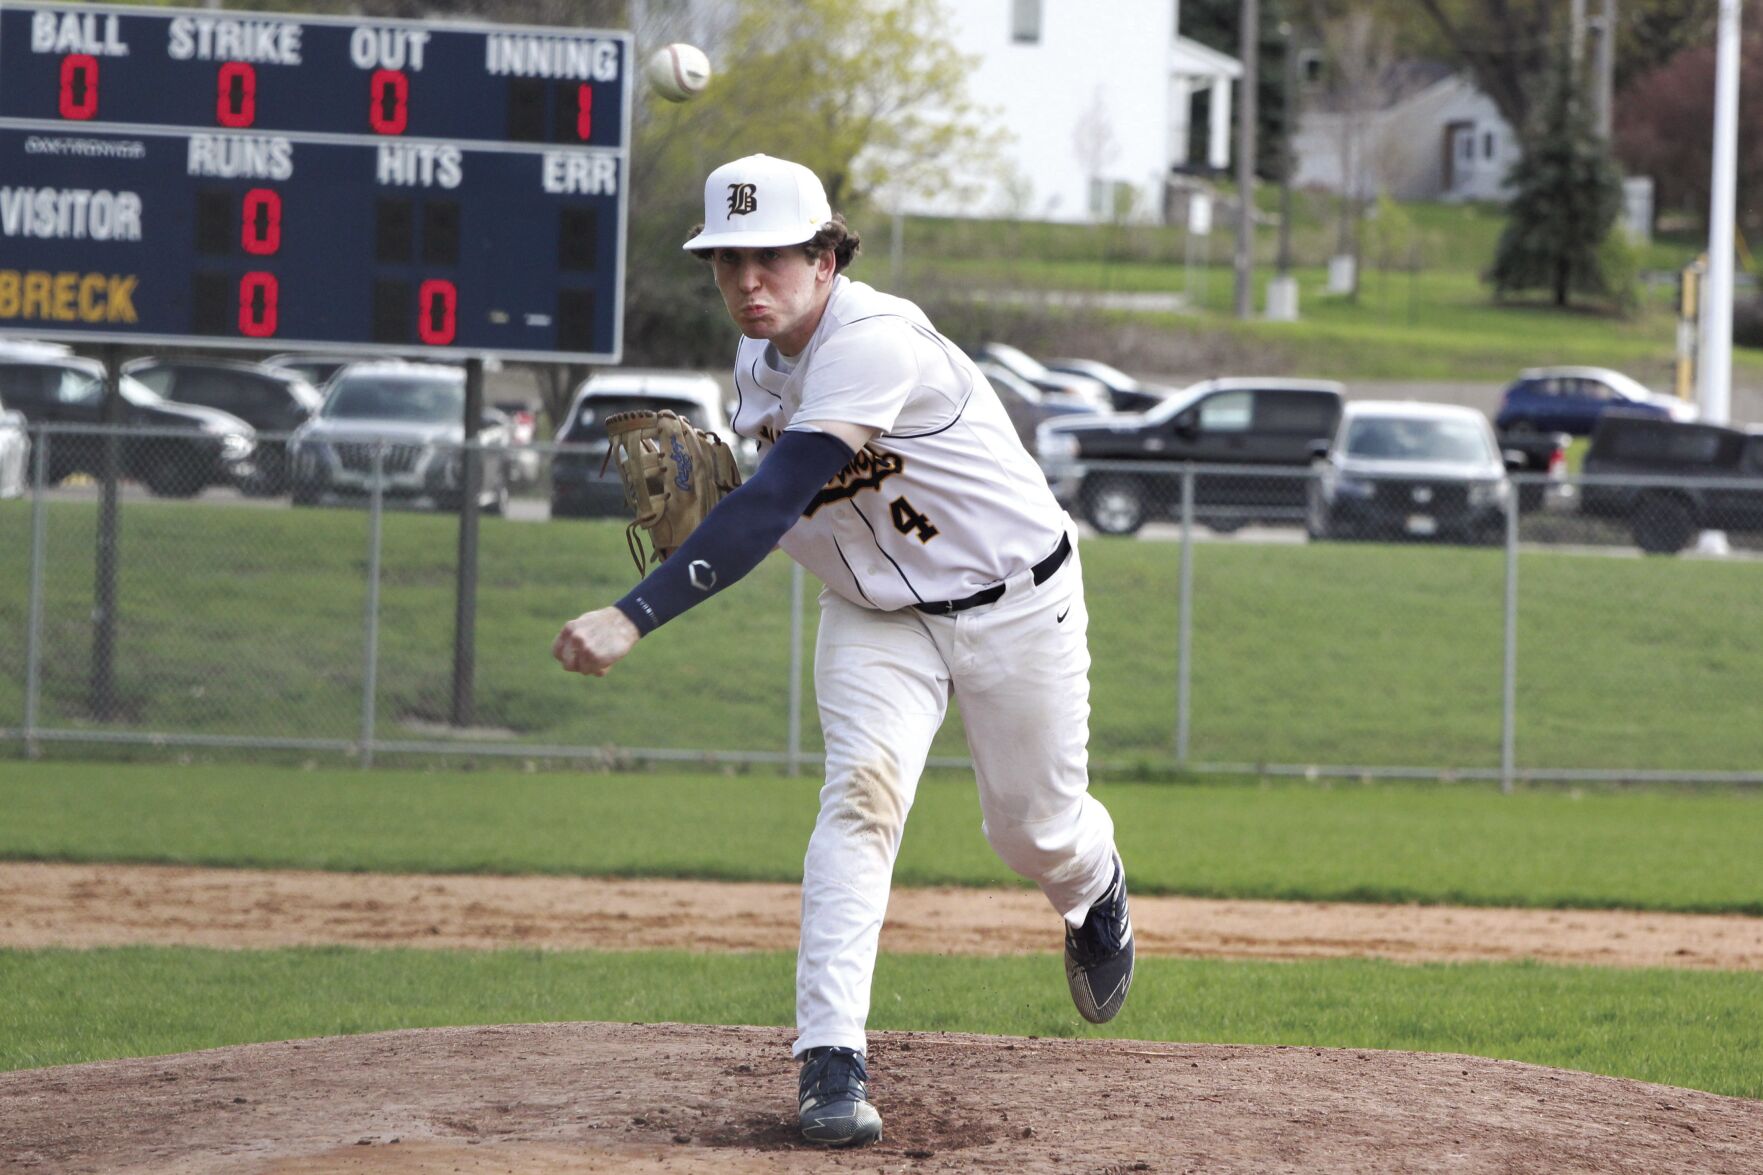 Breck baseball dominates in pair of conference wins